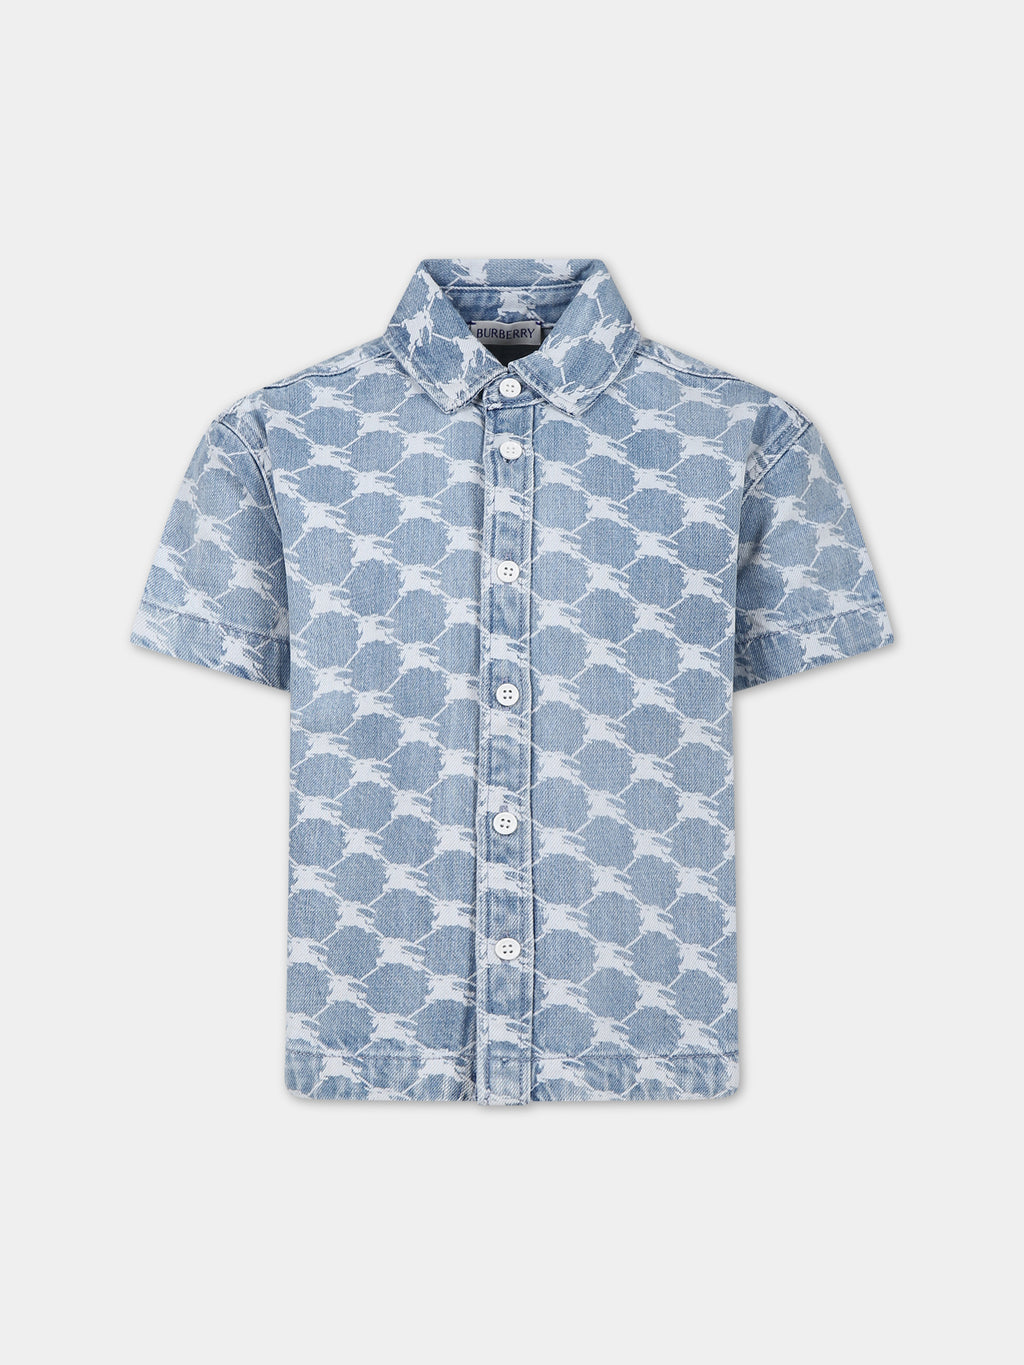 Denim shirt for boy with iconic all-over logo